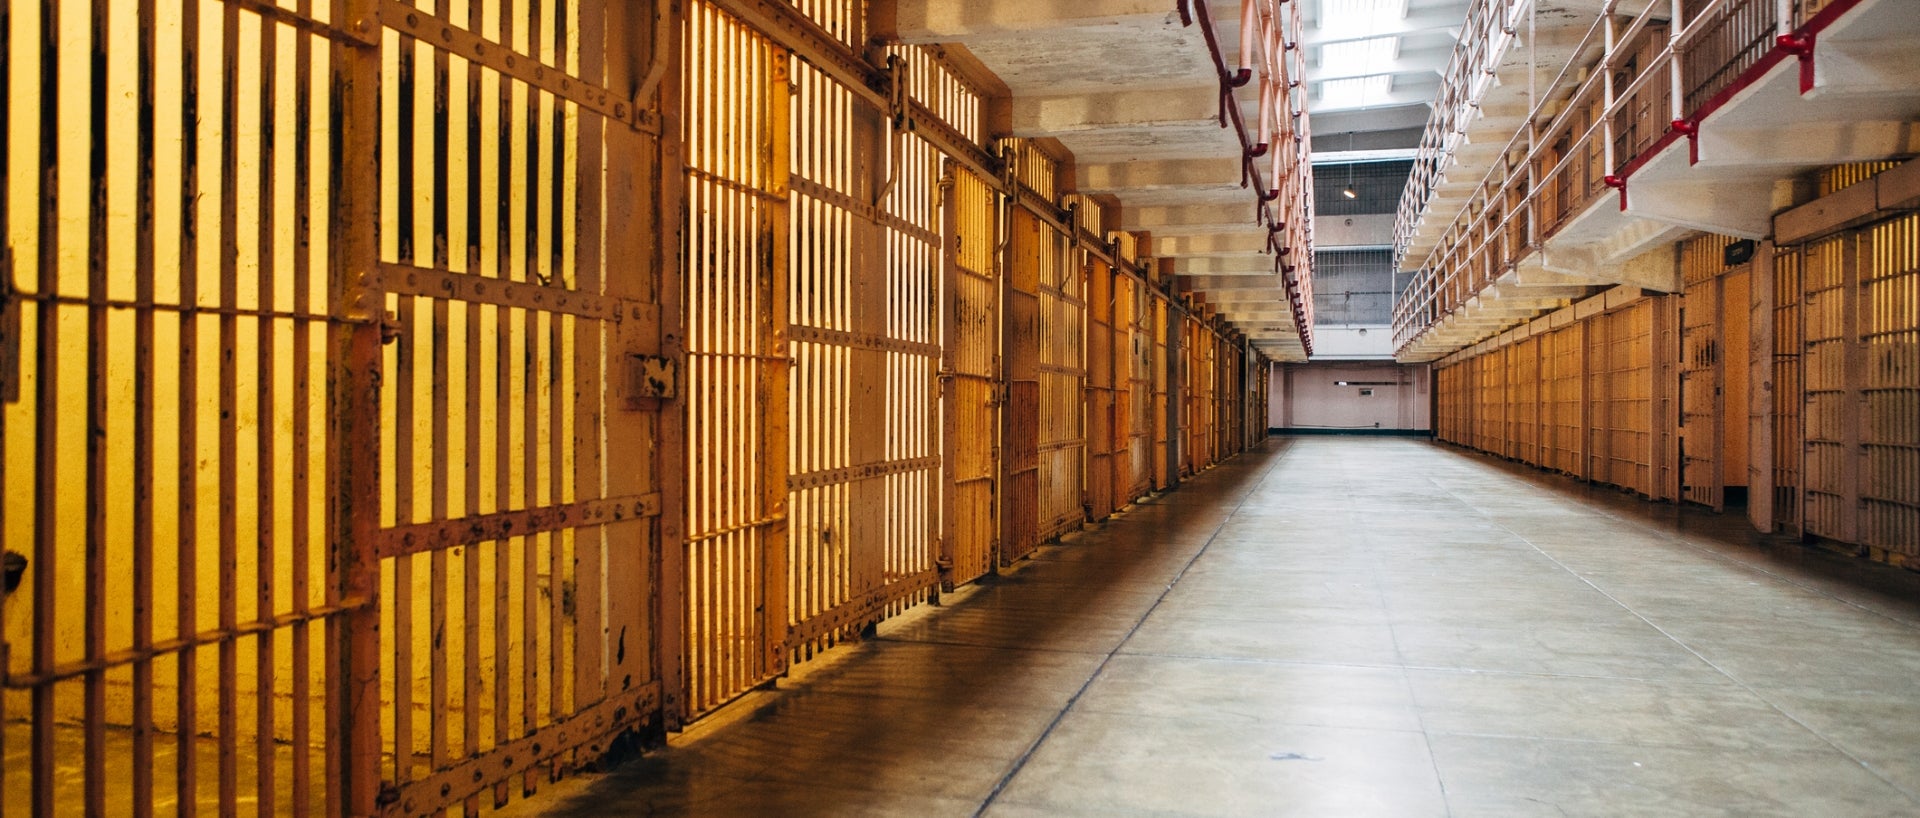 Rows of prison cells